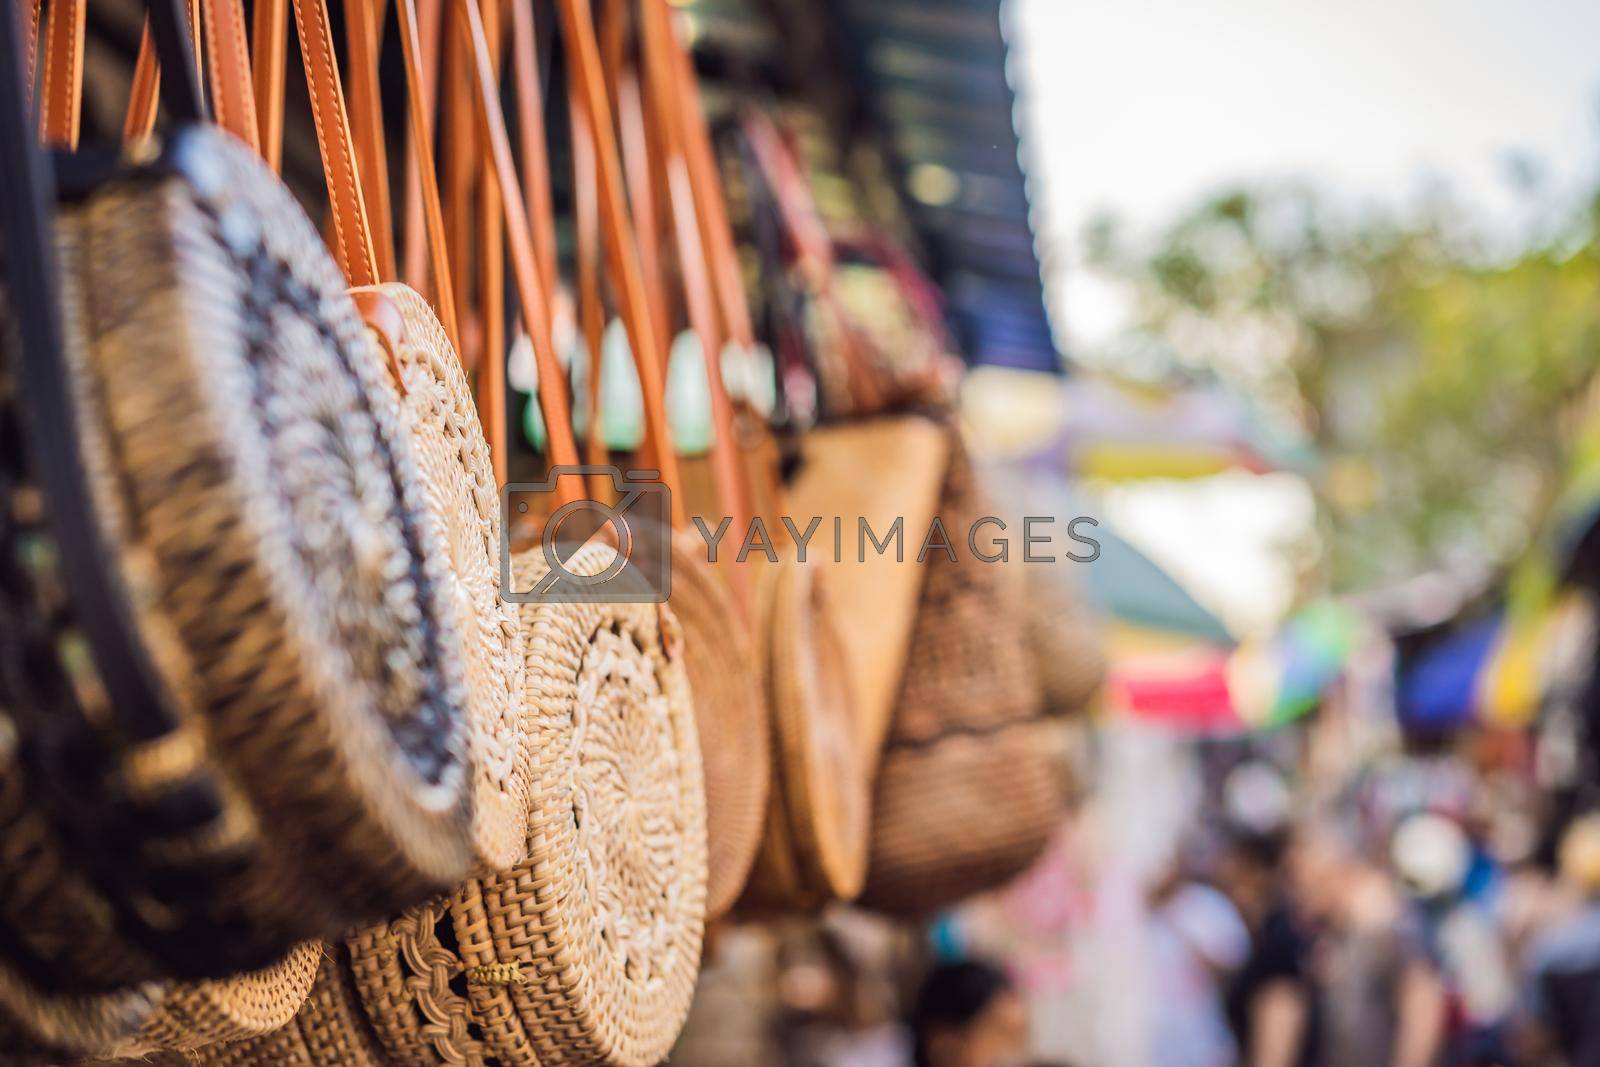 Royalty free image of Typical souvenir shop selling souvenirs and handicrafts of Bali at the famous Ubud Market, Indonesia. Balinese market. Souvenirs of wood and crafts of local residents by galitskaya